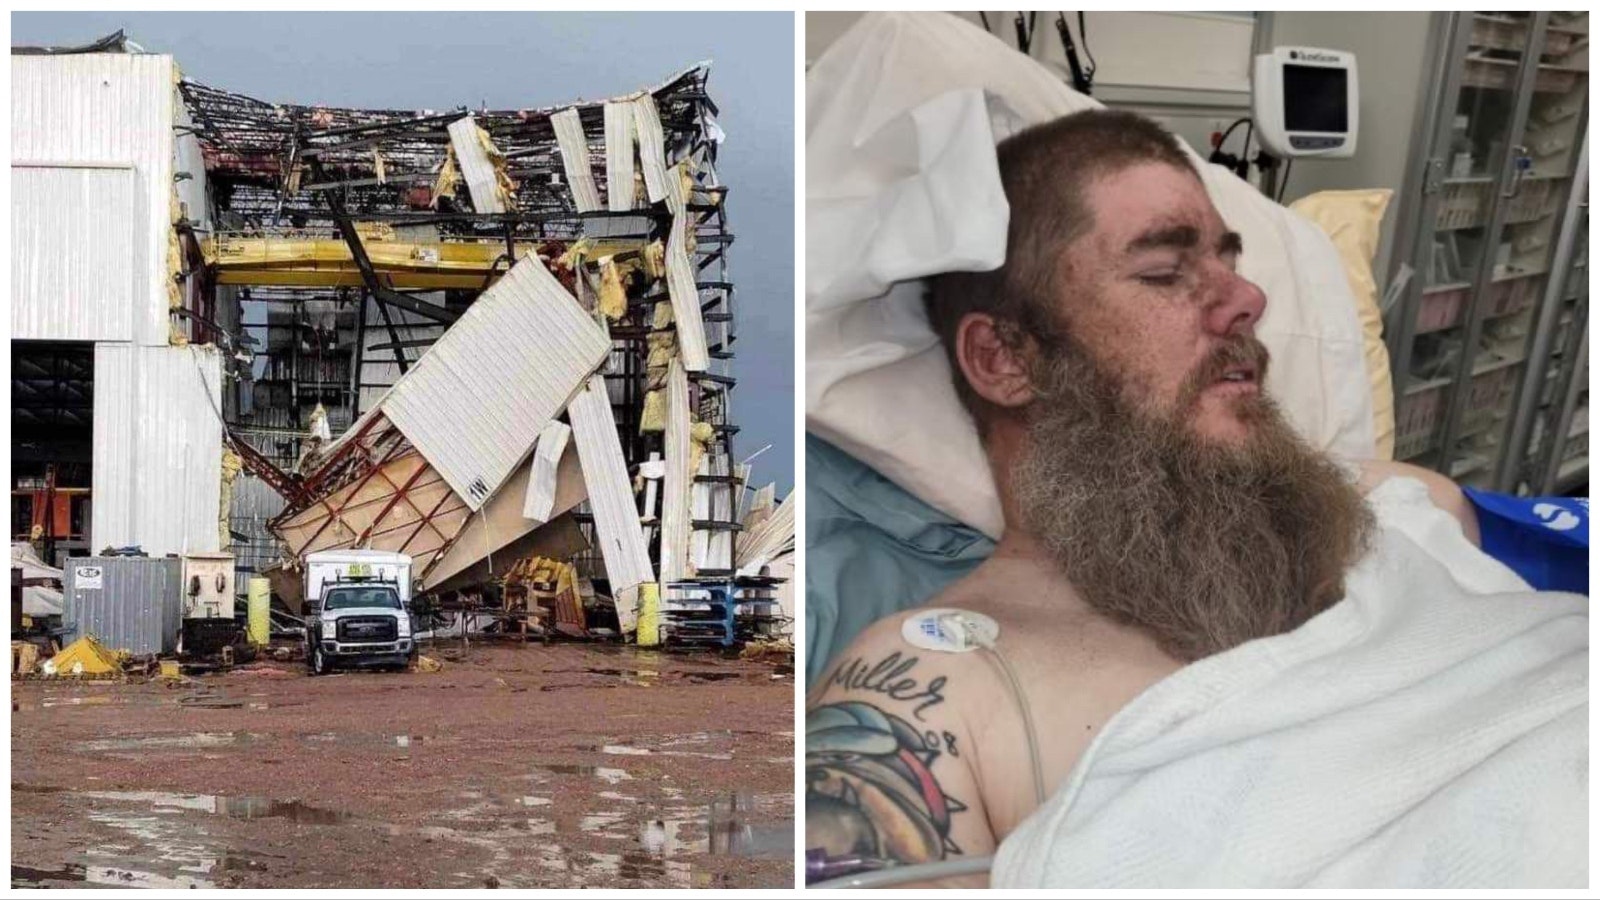 Andrew Gregory was in this warehouse building June 23 when a category EF2 tornado destroyed it at the North Antelope Rochelle coal mine in Wyoming. He lived to tell about the terrifying experience.